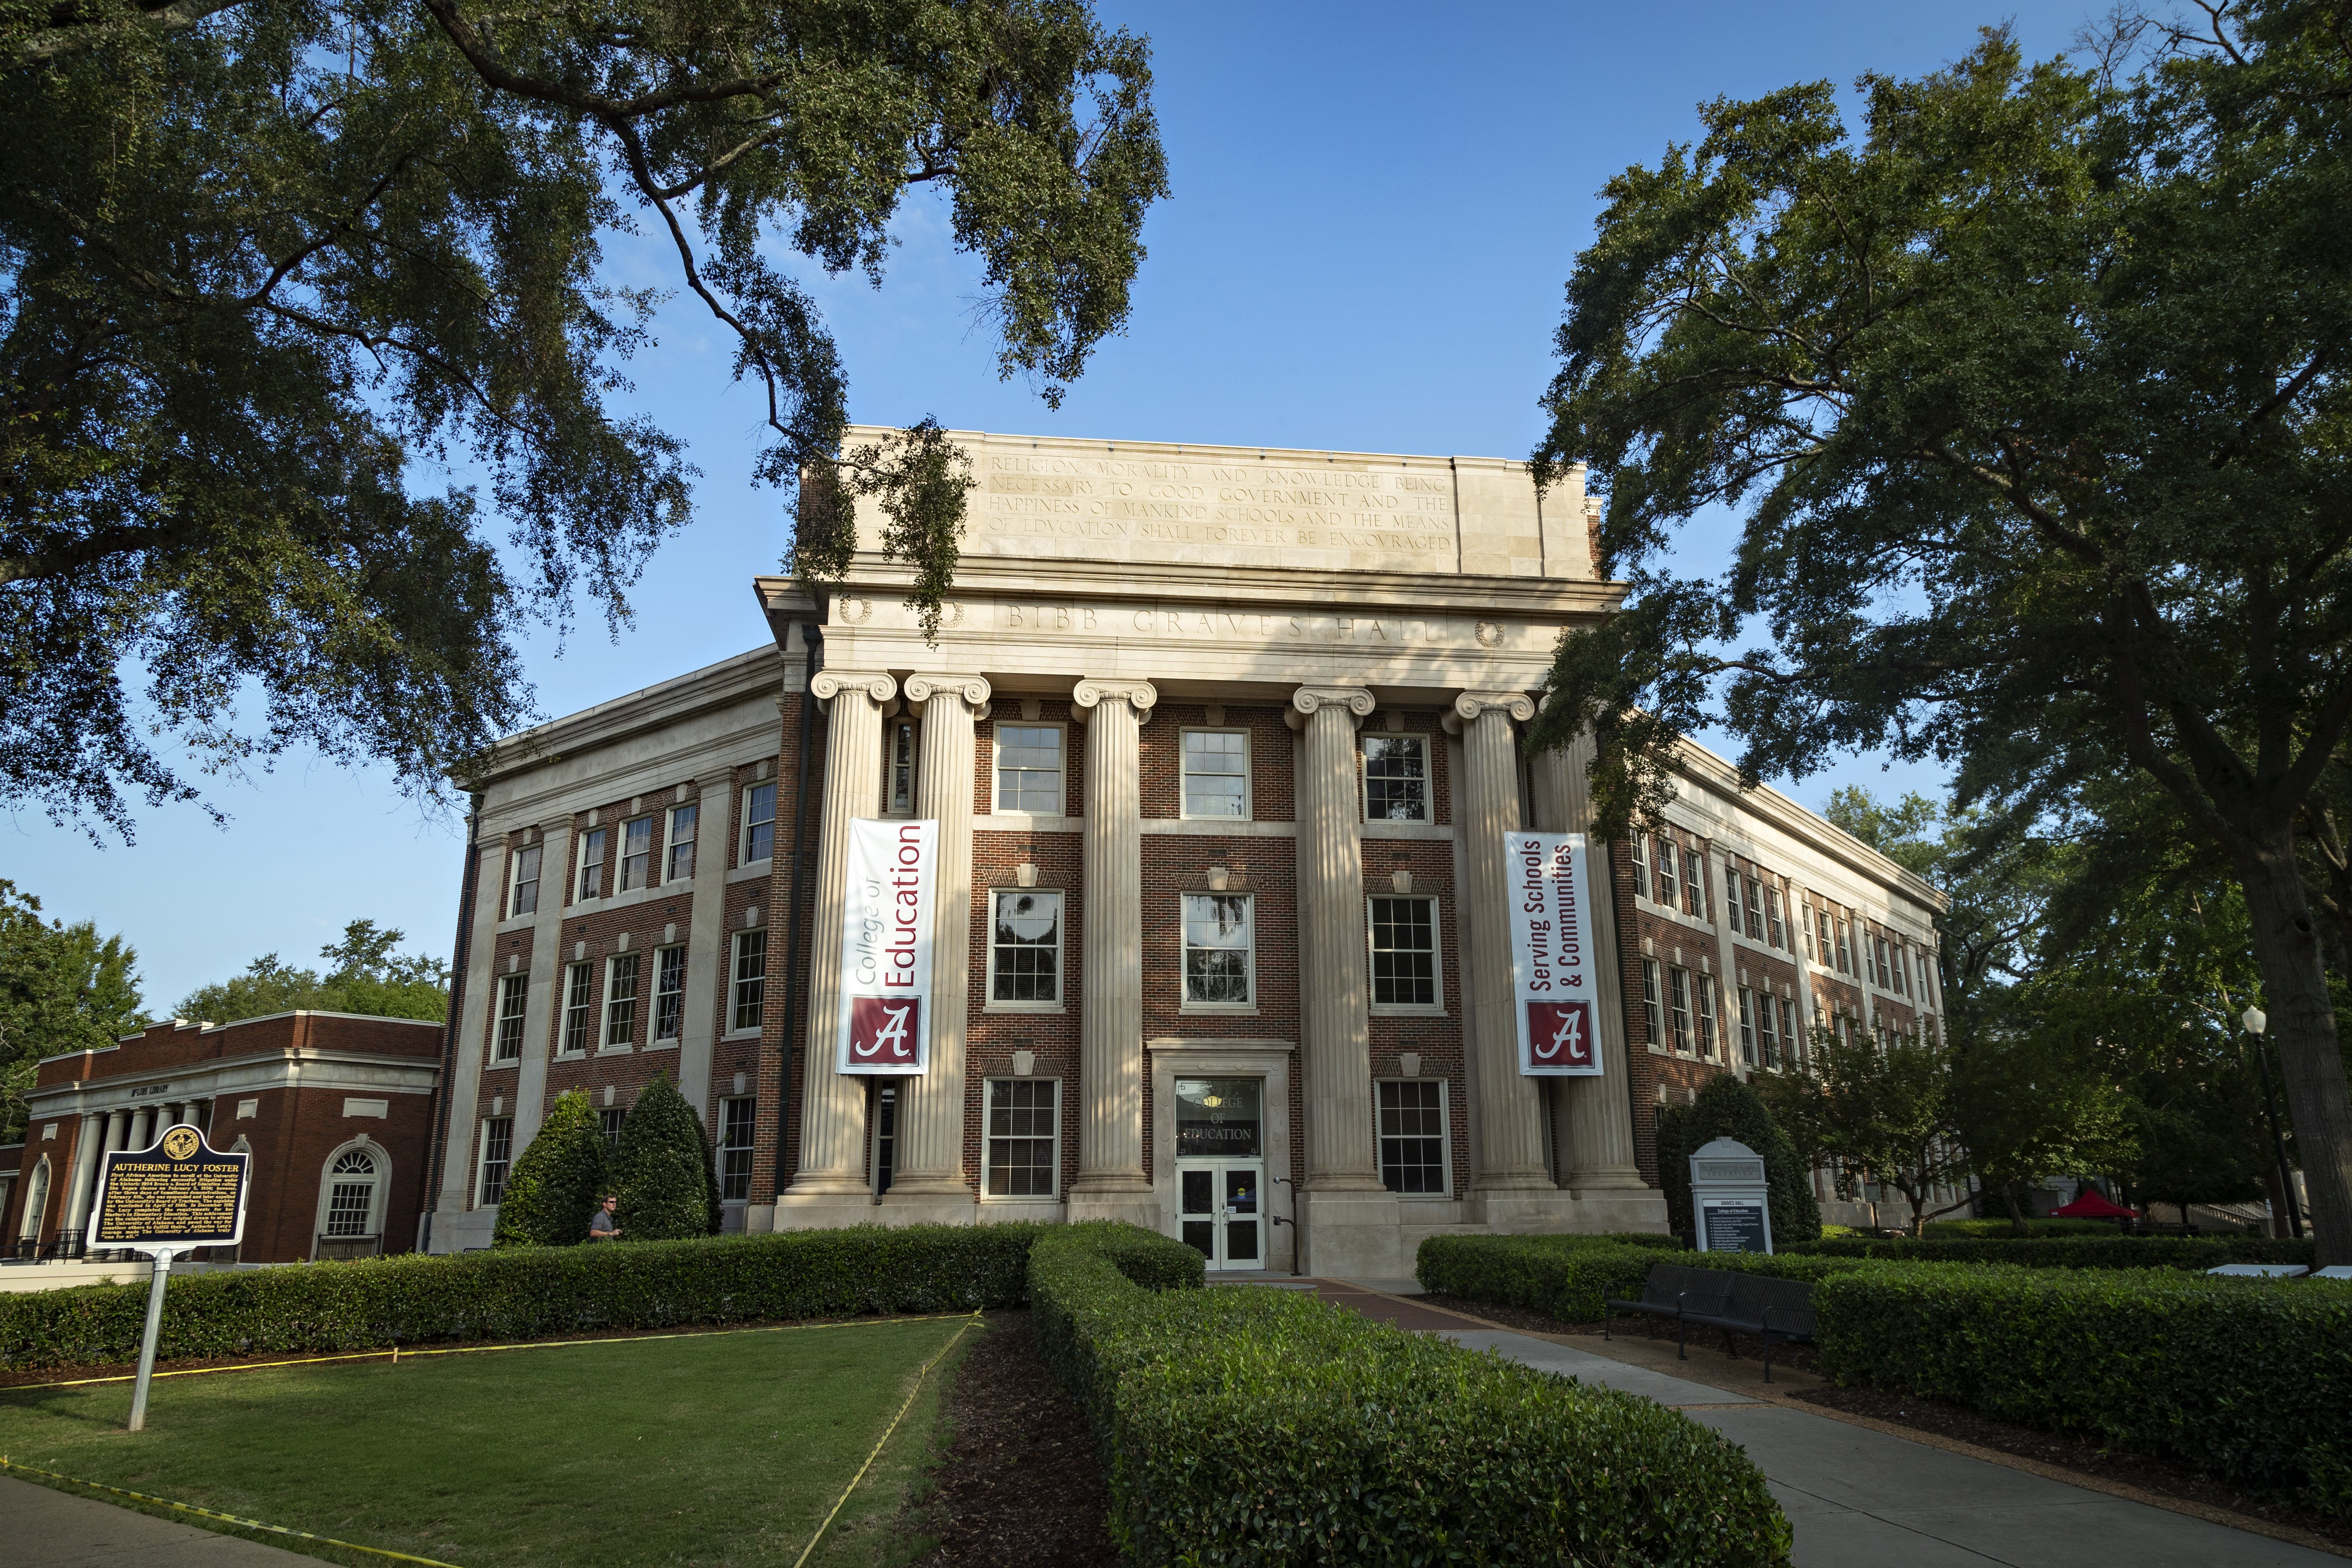 Bibb Graves Hall on the campus of the University of Alabama on September 22, 2018 in Tuscaloosa, Alabama. | Source: Getty Images